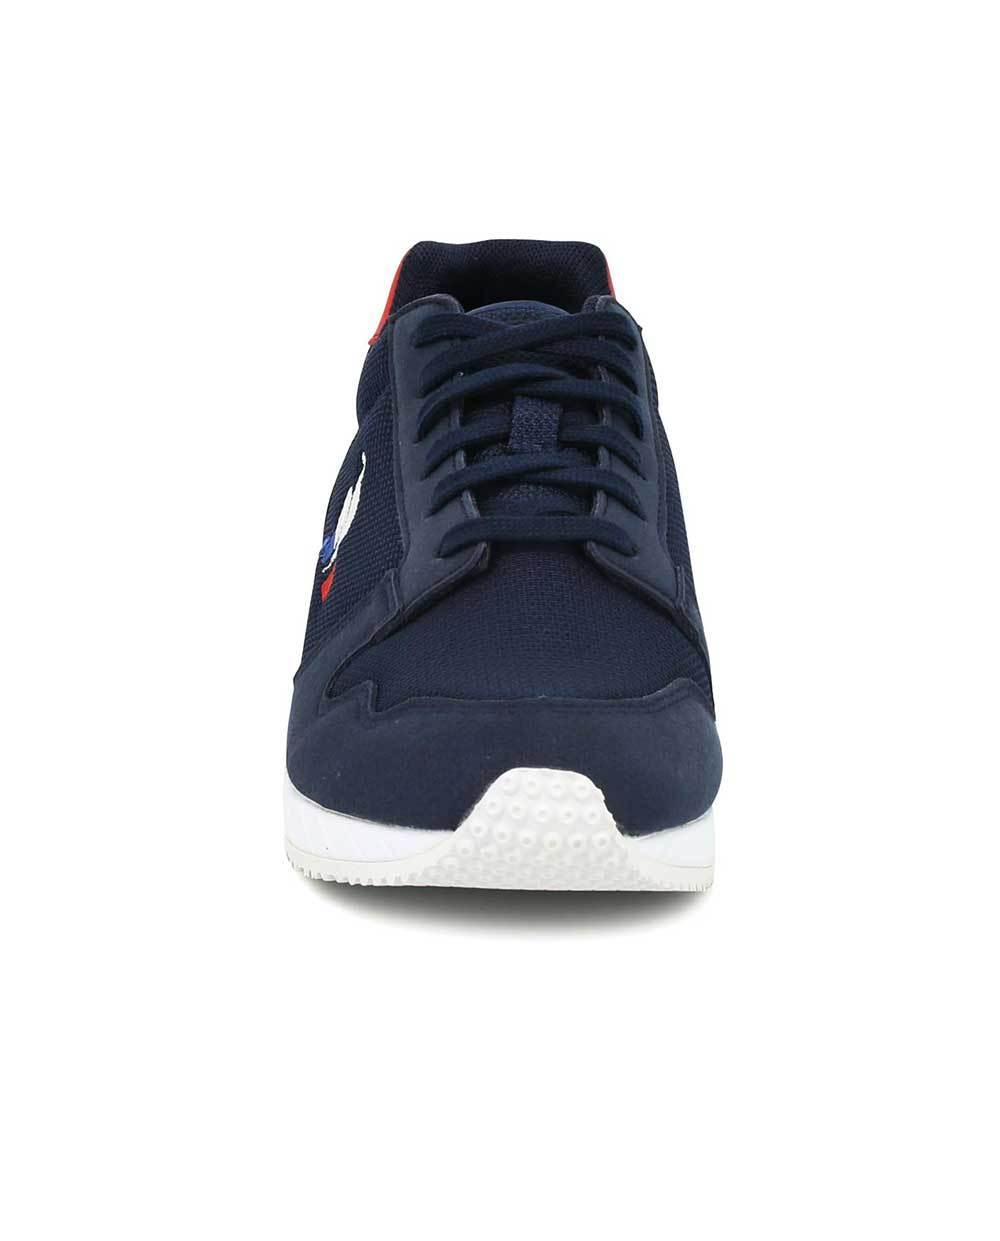 Le Coq Sportif Jazy GS Blue and Red